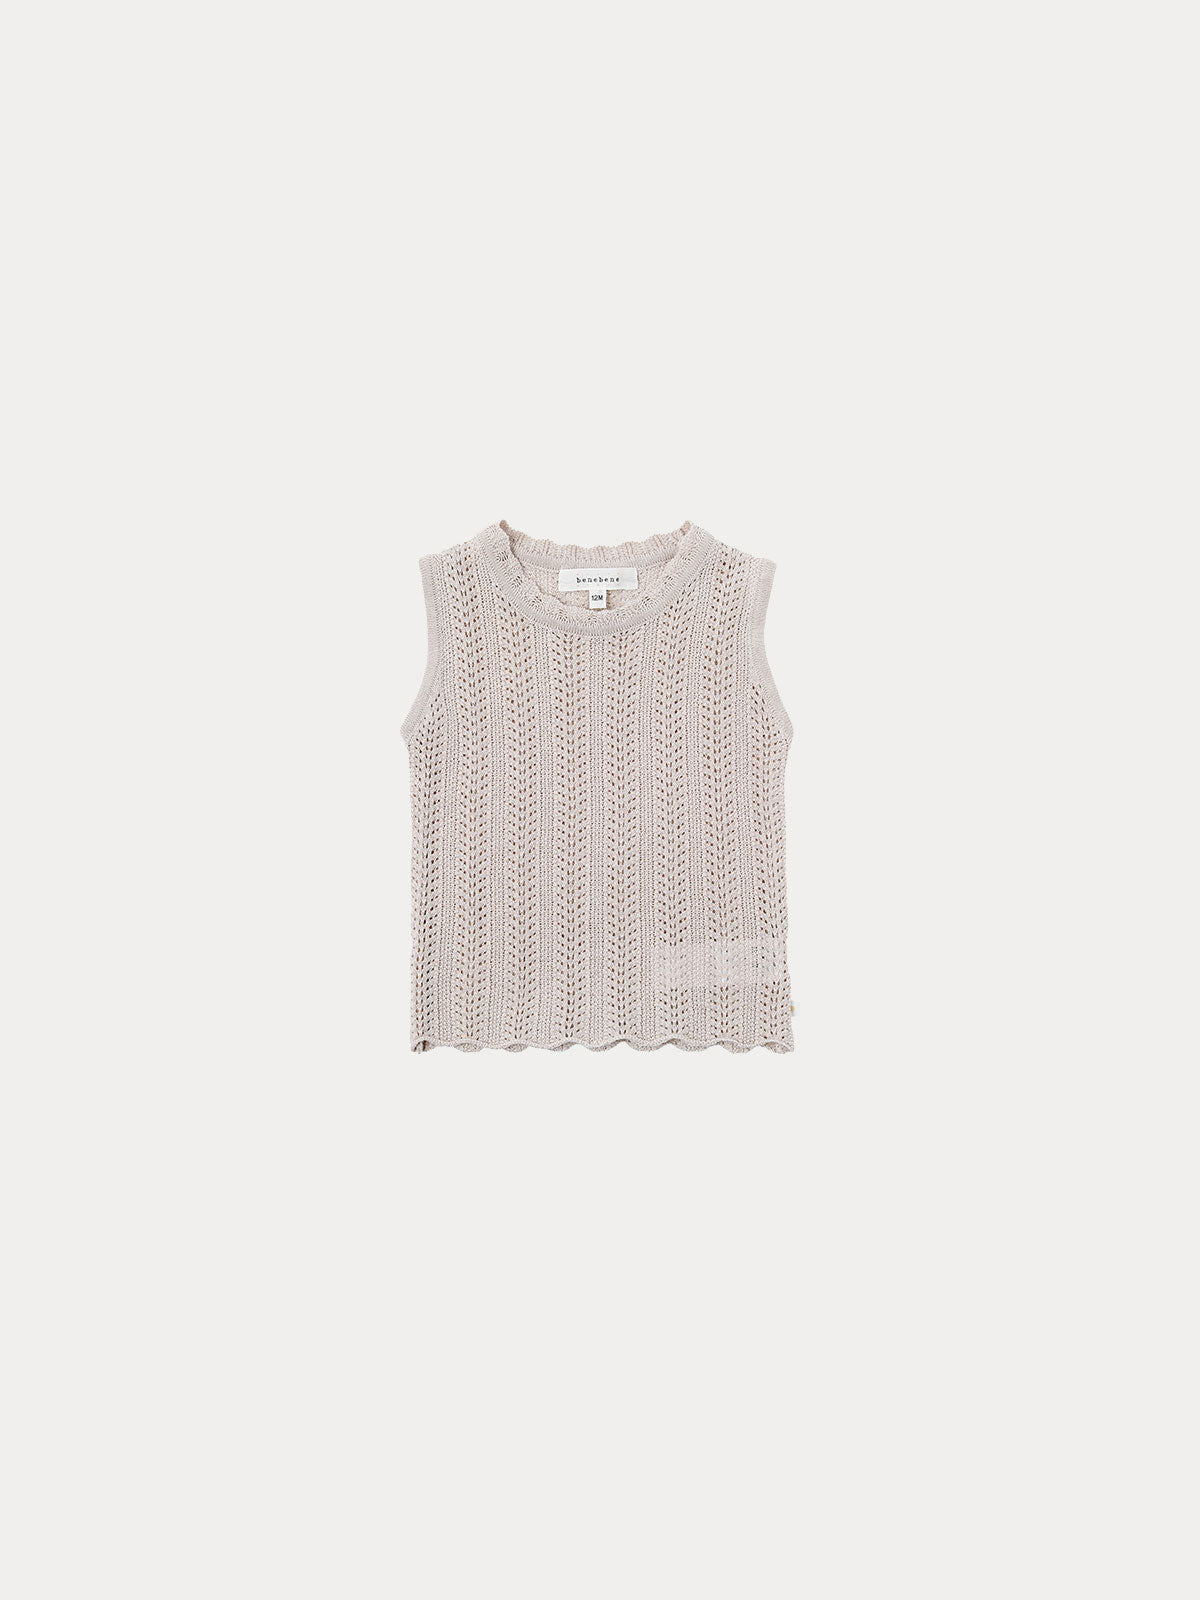 Comely Eyelet Sleeveless Knit Top